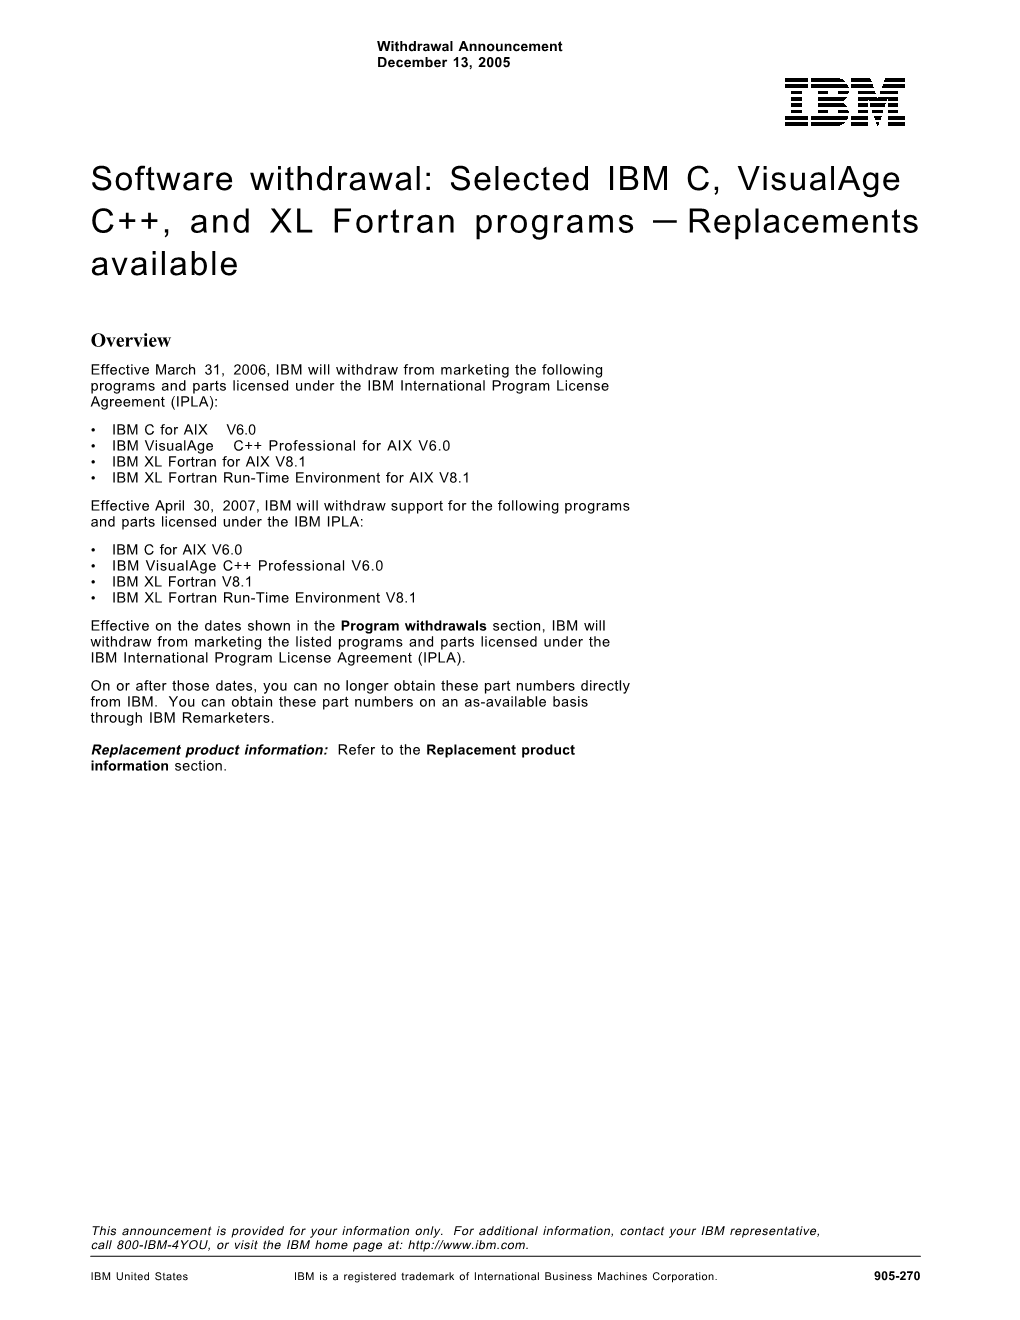 Selected IBM C, Visualage C++, and XL Fortran Programs — Replacements Available